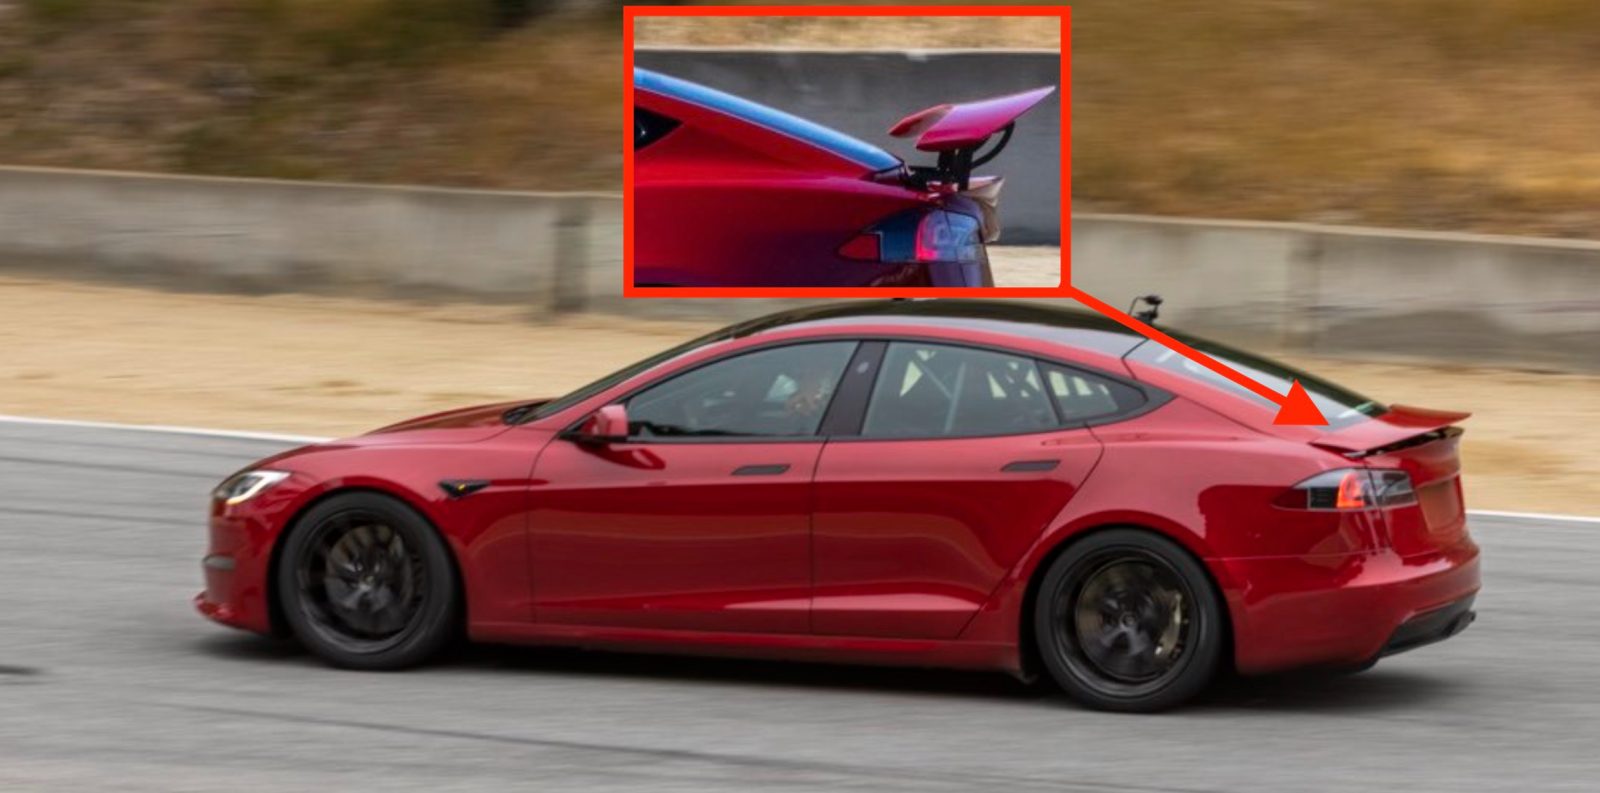 Tesla Model S Plaid achieves new quarter-mile world record in 9.2 seconds